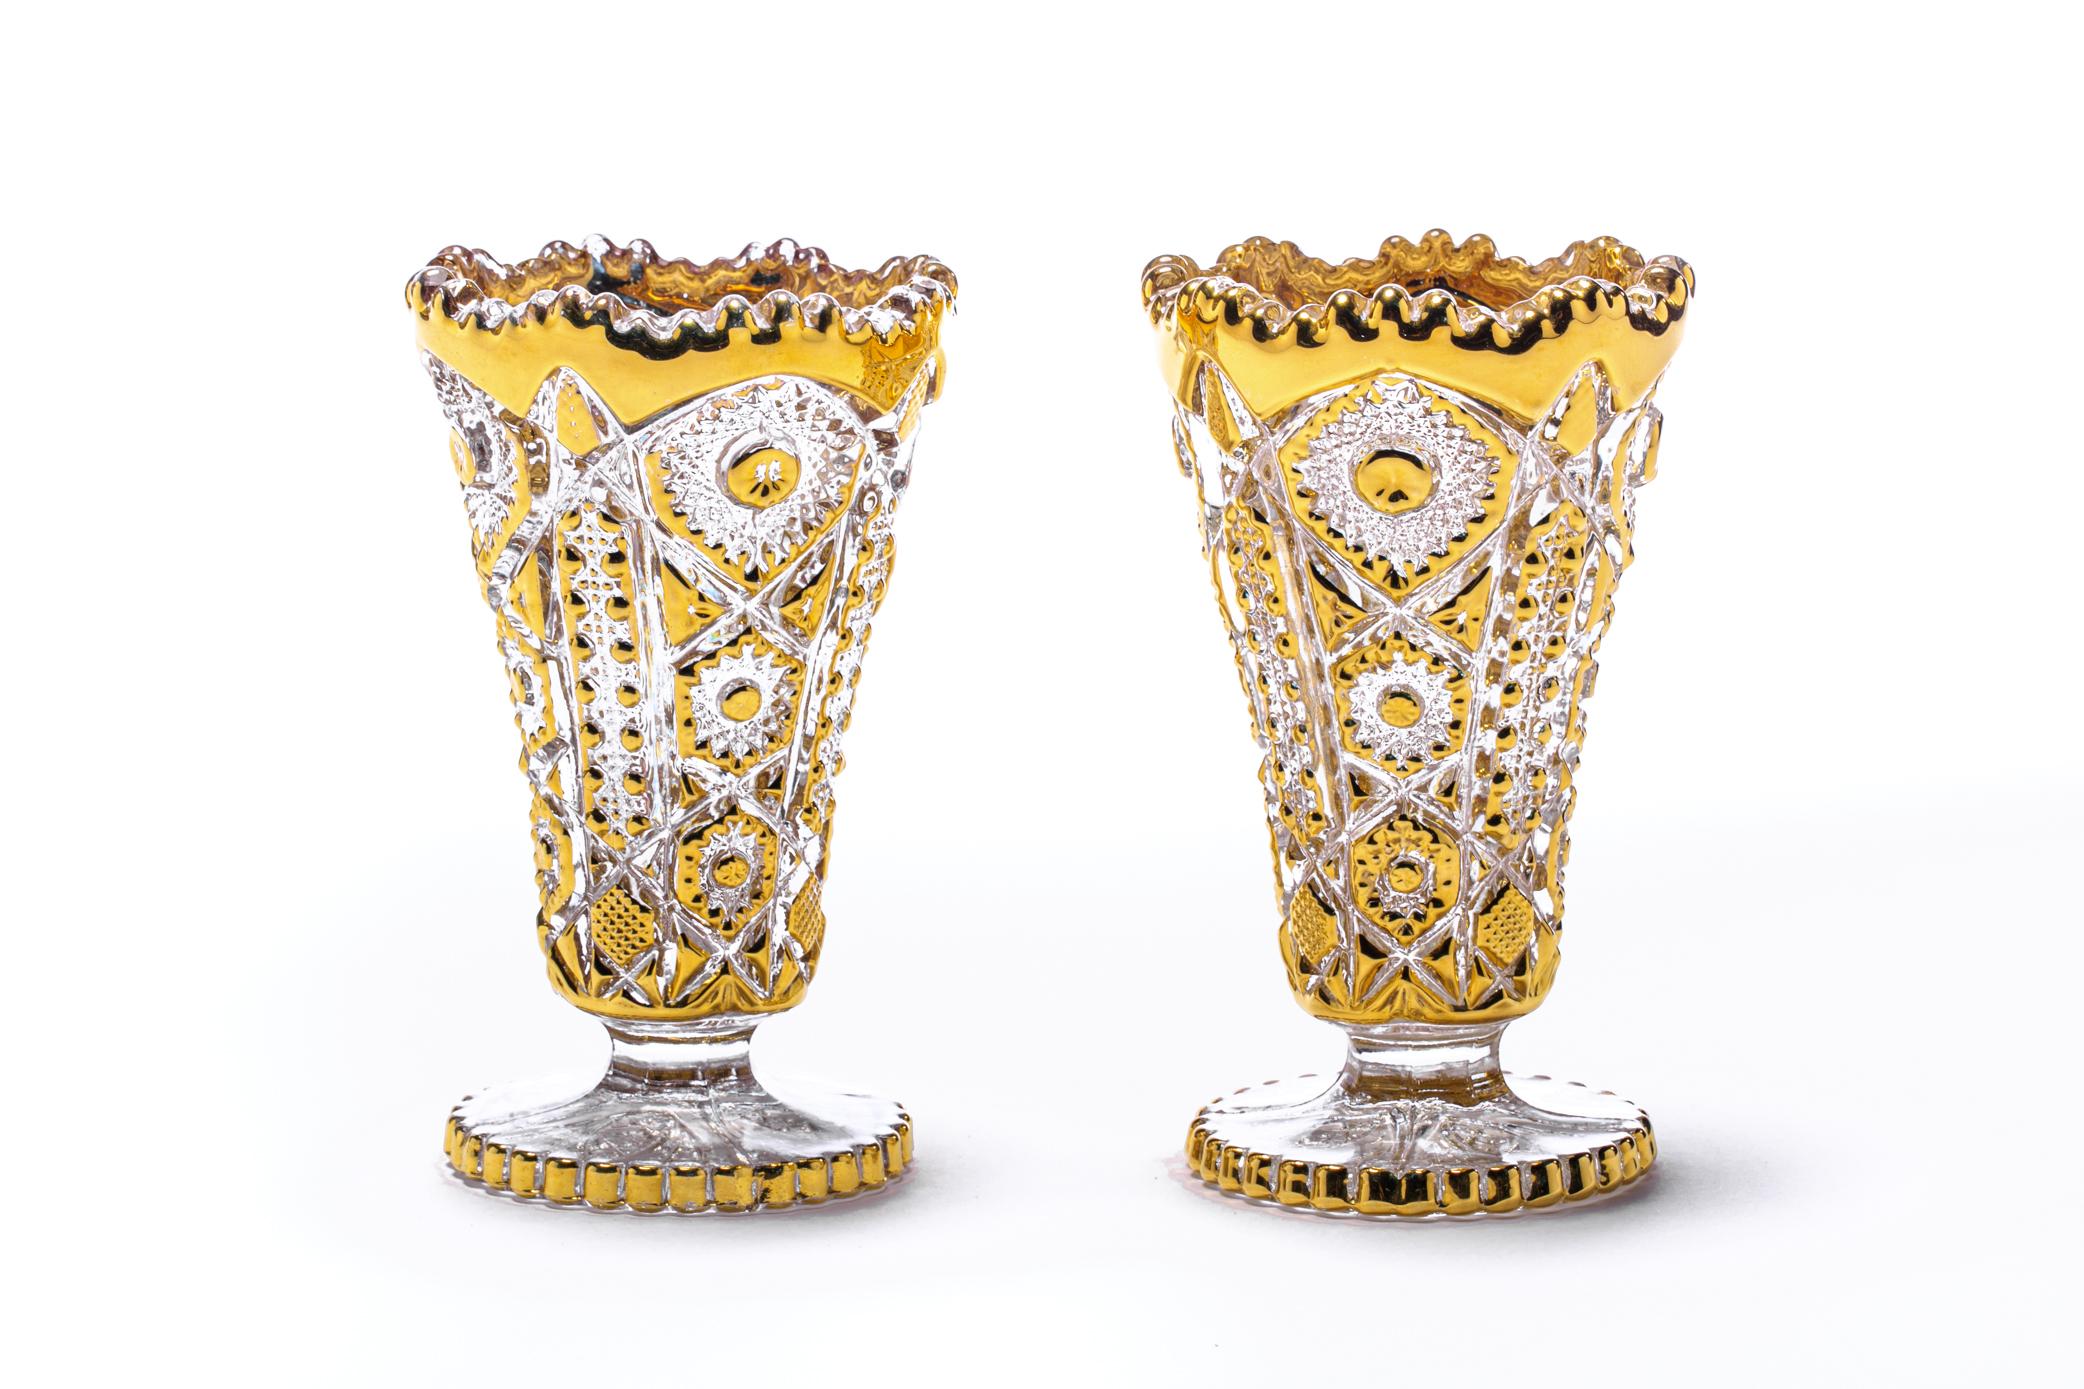 Pair of Hollywood Regency 22k Gold Painted Vases by Imperial Glass Co. c. 1965 For Sale 11